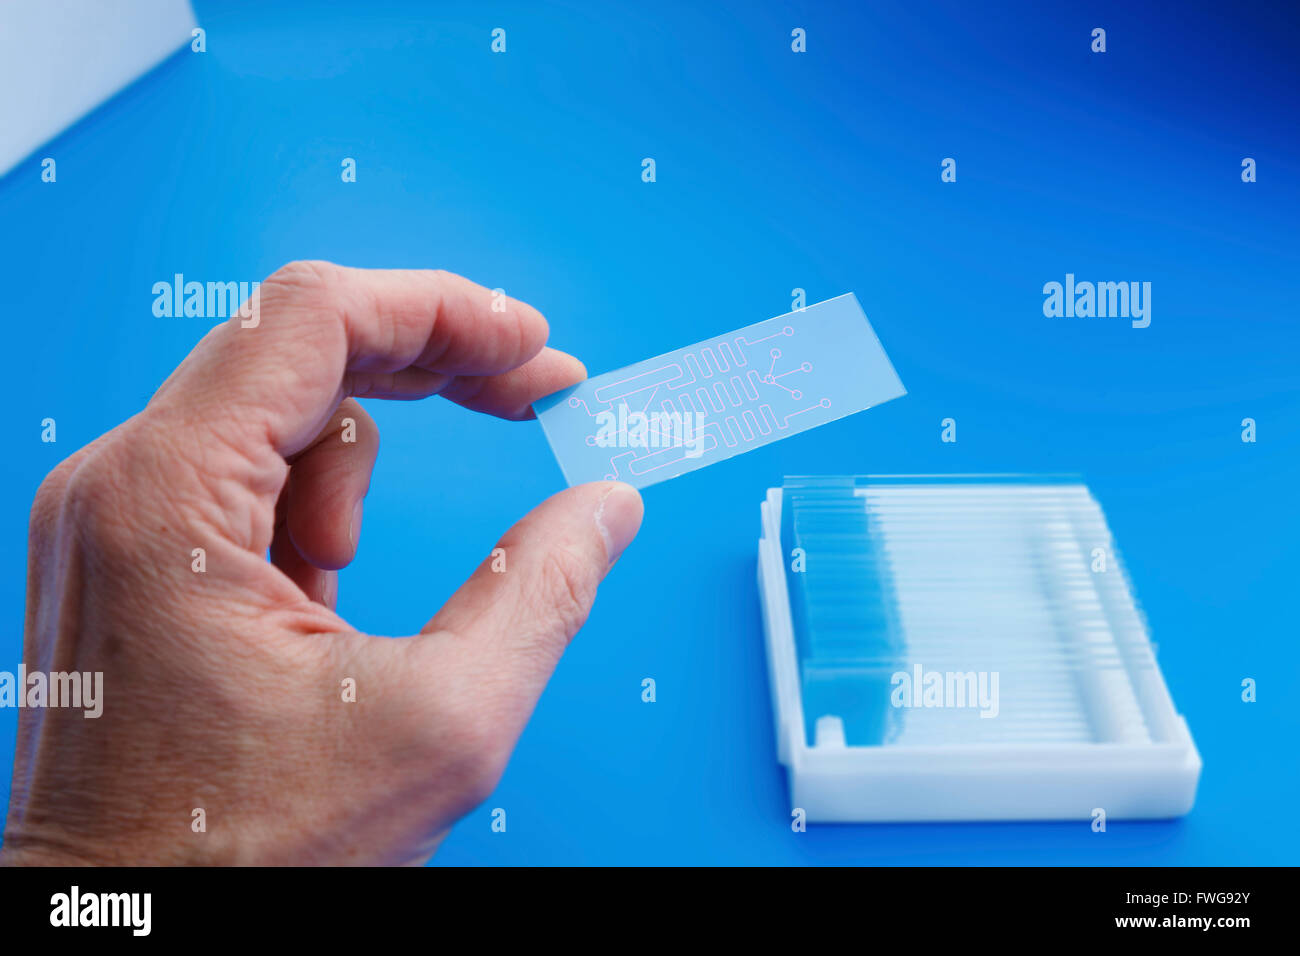 Lab on a chip (loc) technology. Stock Photo